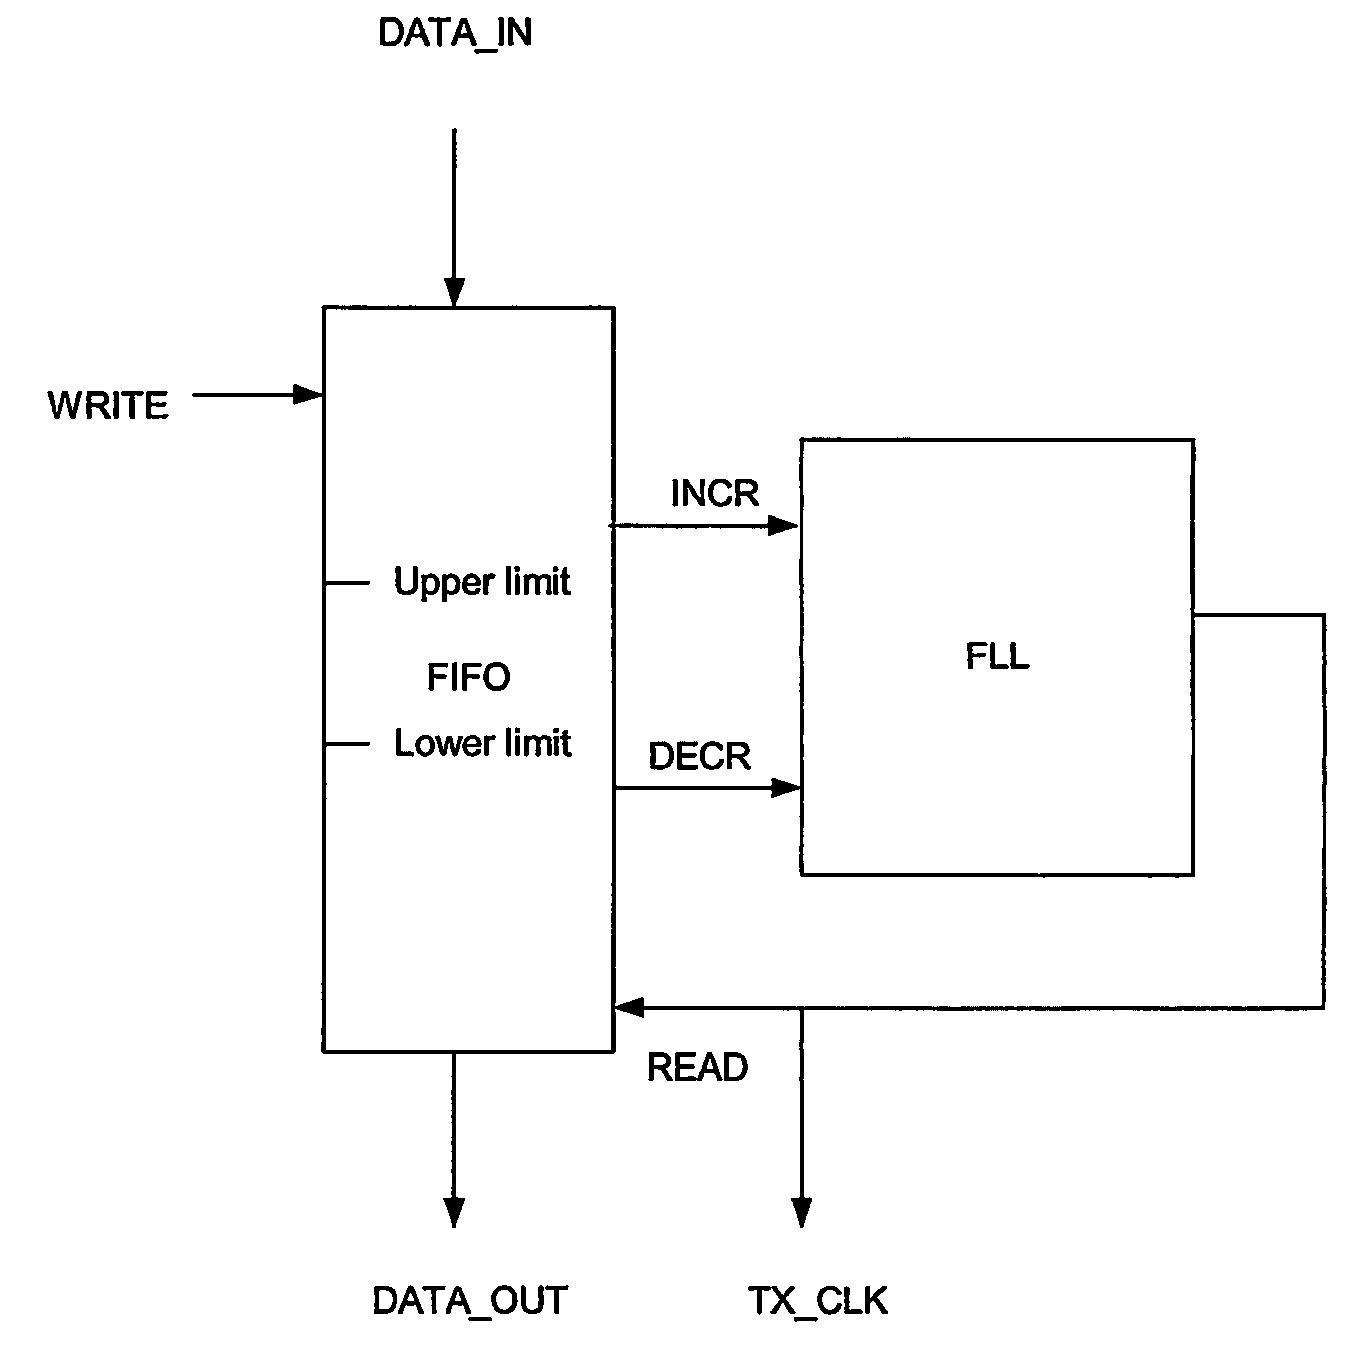 Rate adaption within a TDM switch using bit stuffing